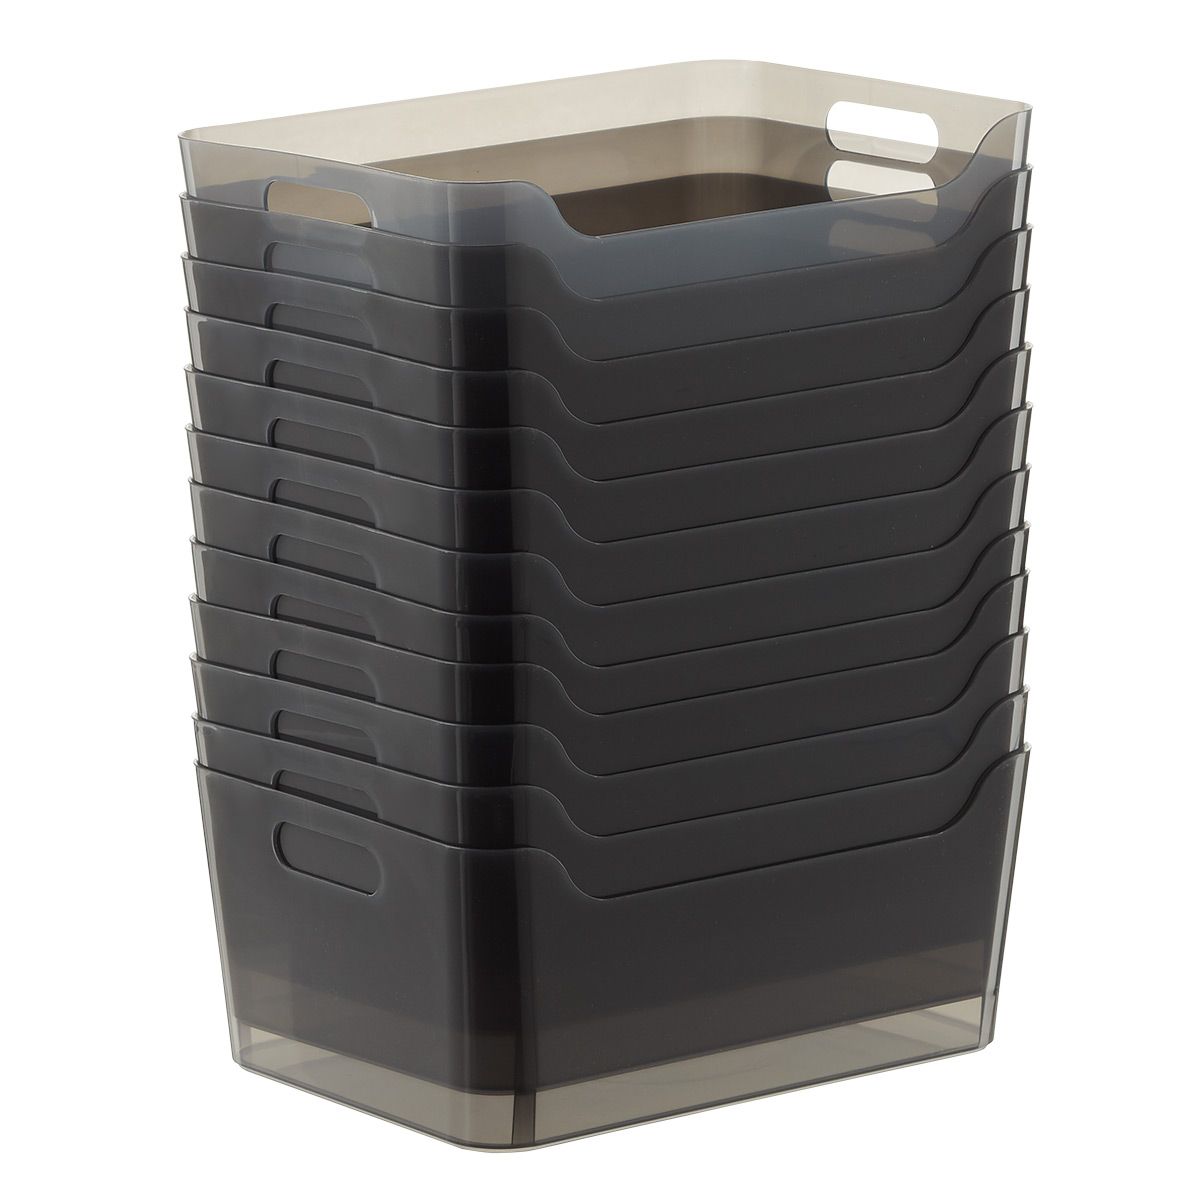 Plastic Storage Bins with Handles | The Container Store